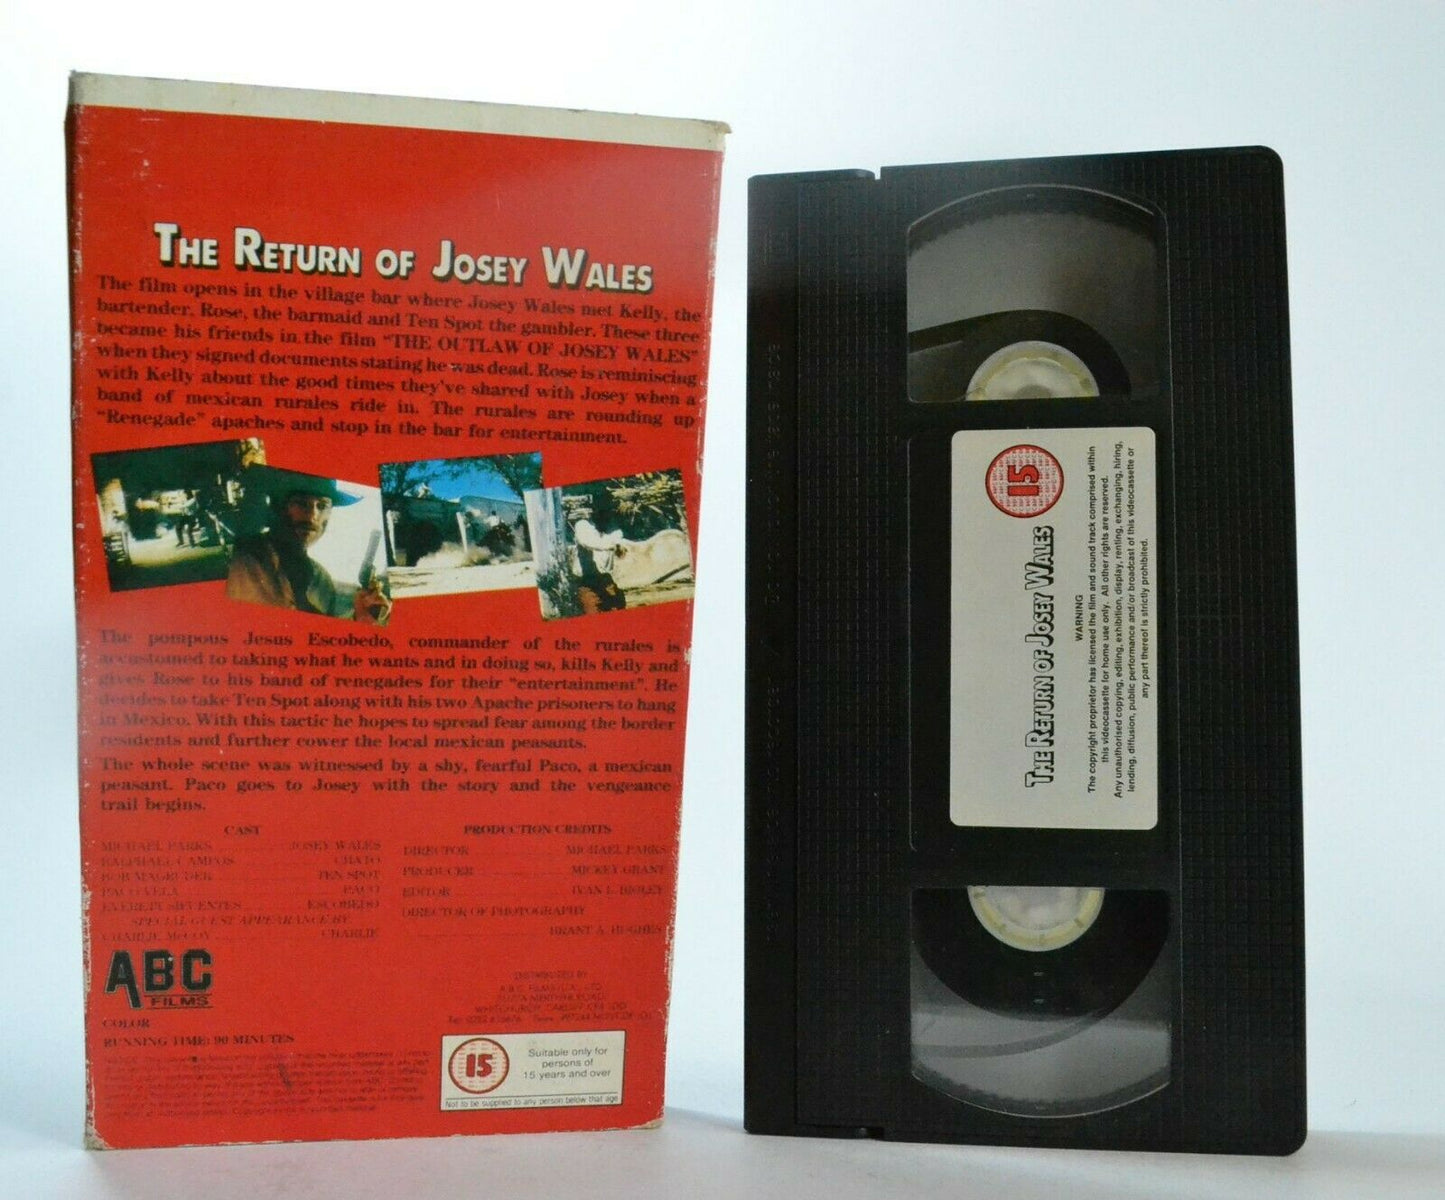 The Return Of Josey Wales (ABC Films) - Carton Box - Western - M.Parks - Pal VHS-